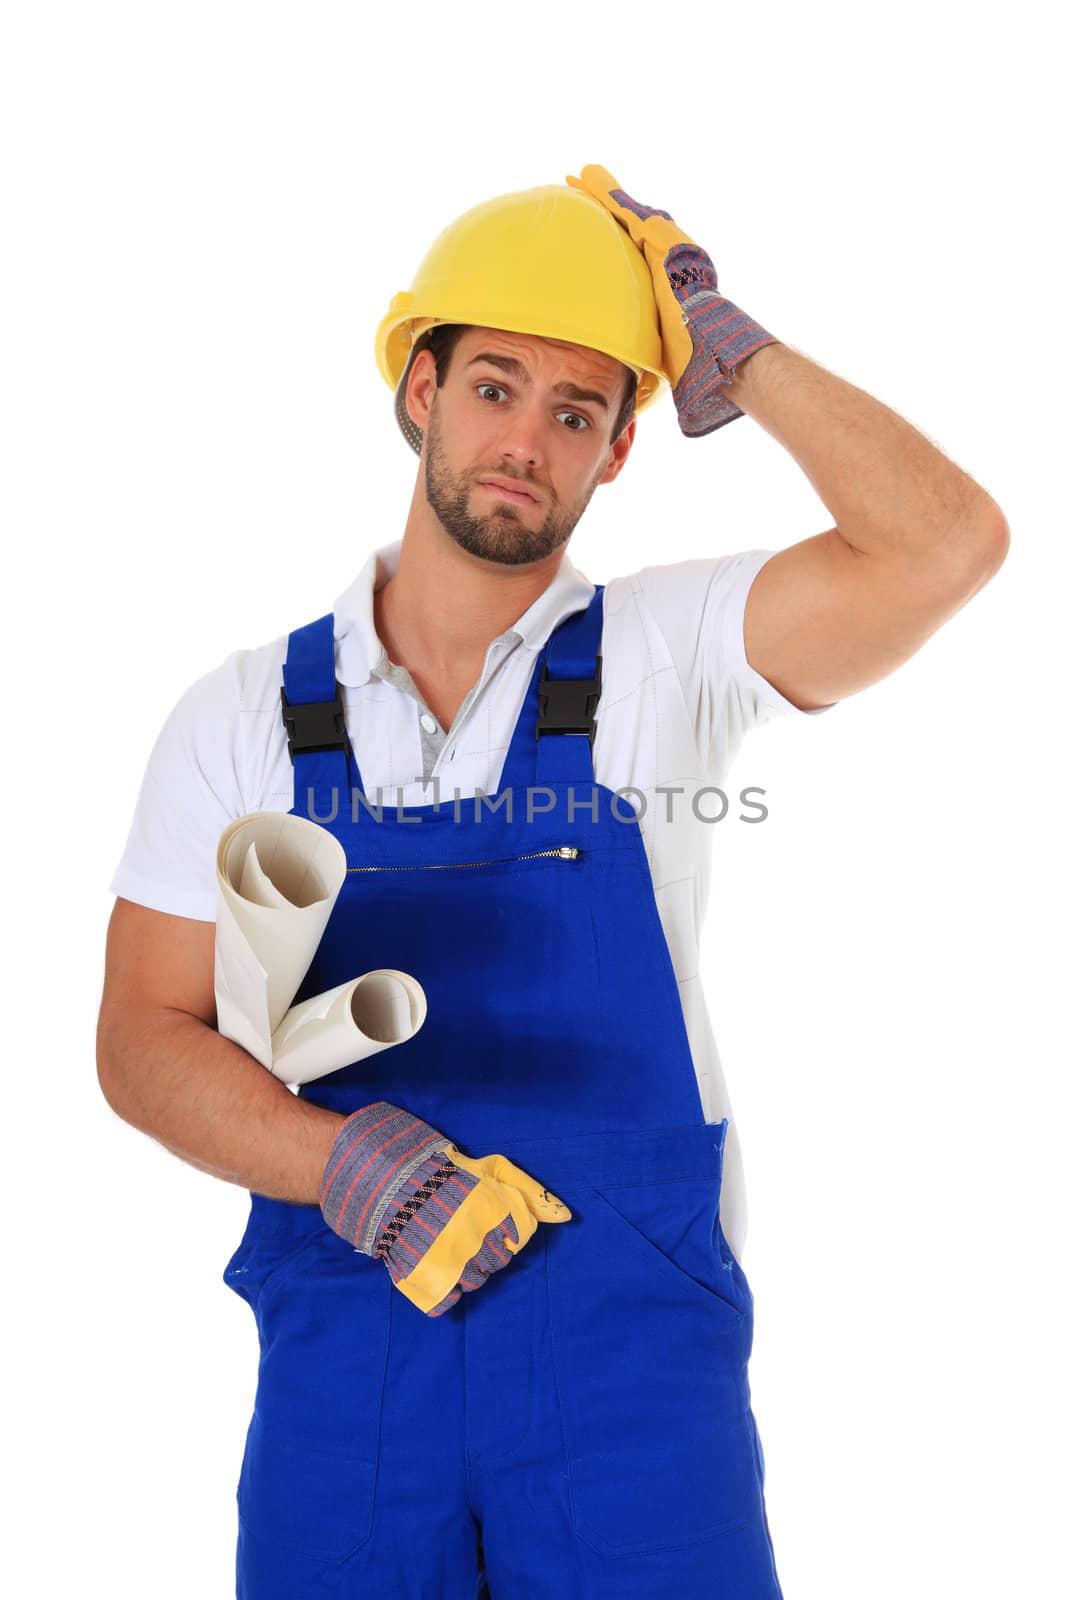 Clueless construction worker. All on white background.